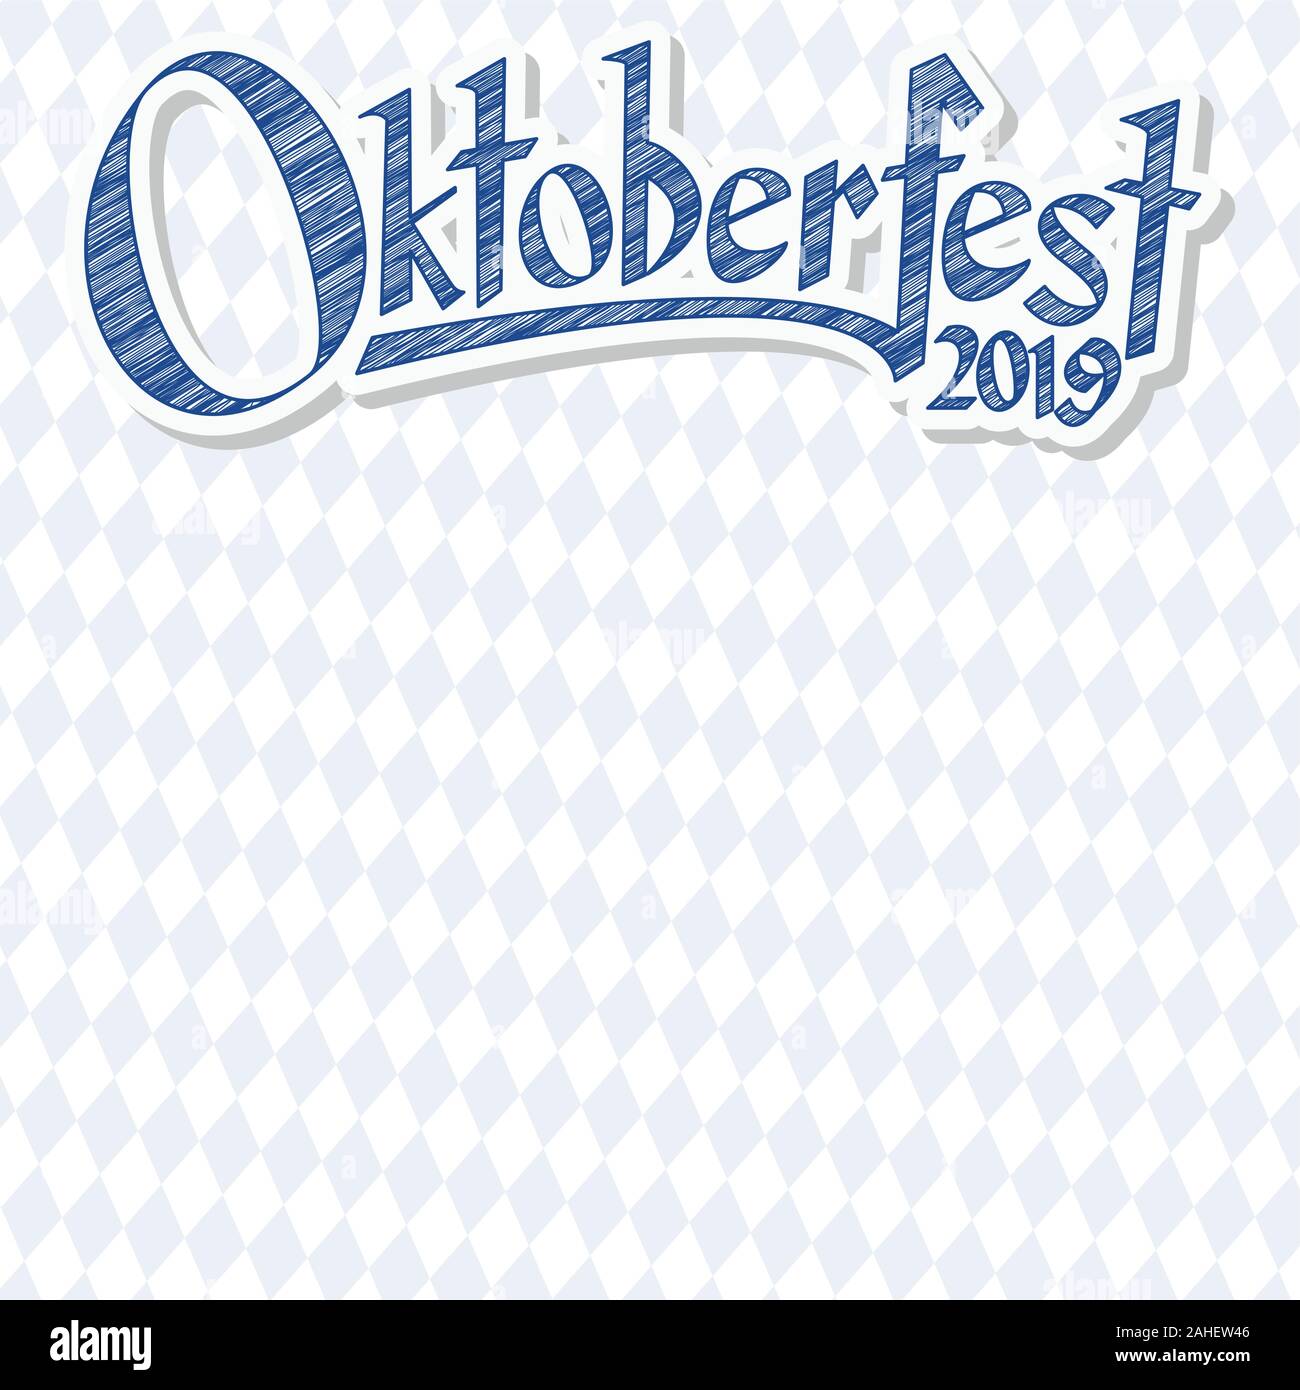 Oktoberfest background with blue-white checkered pattern and text Oktoberfest 2019 (in german) Stock Vector